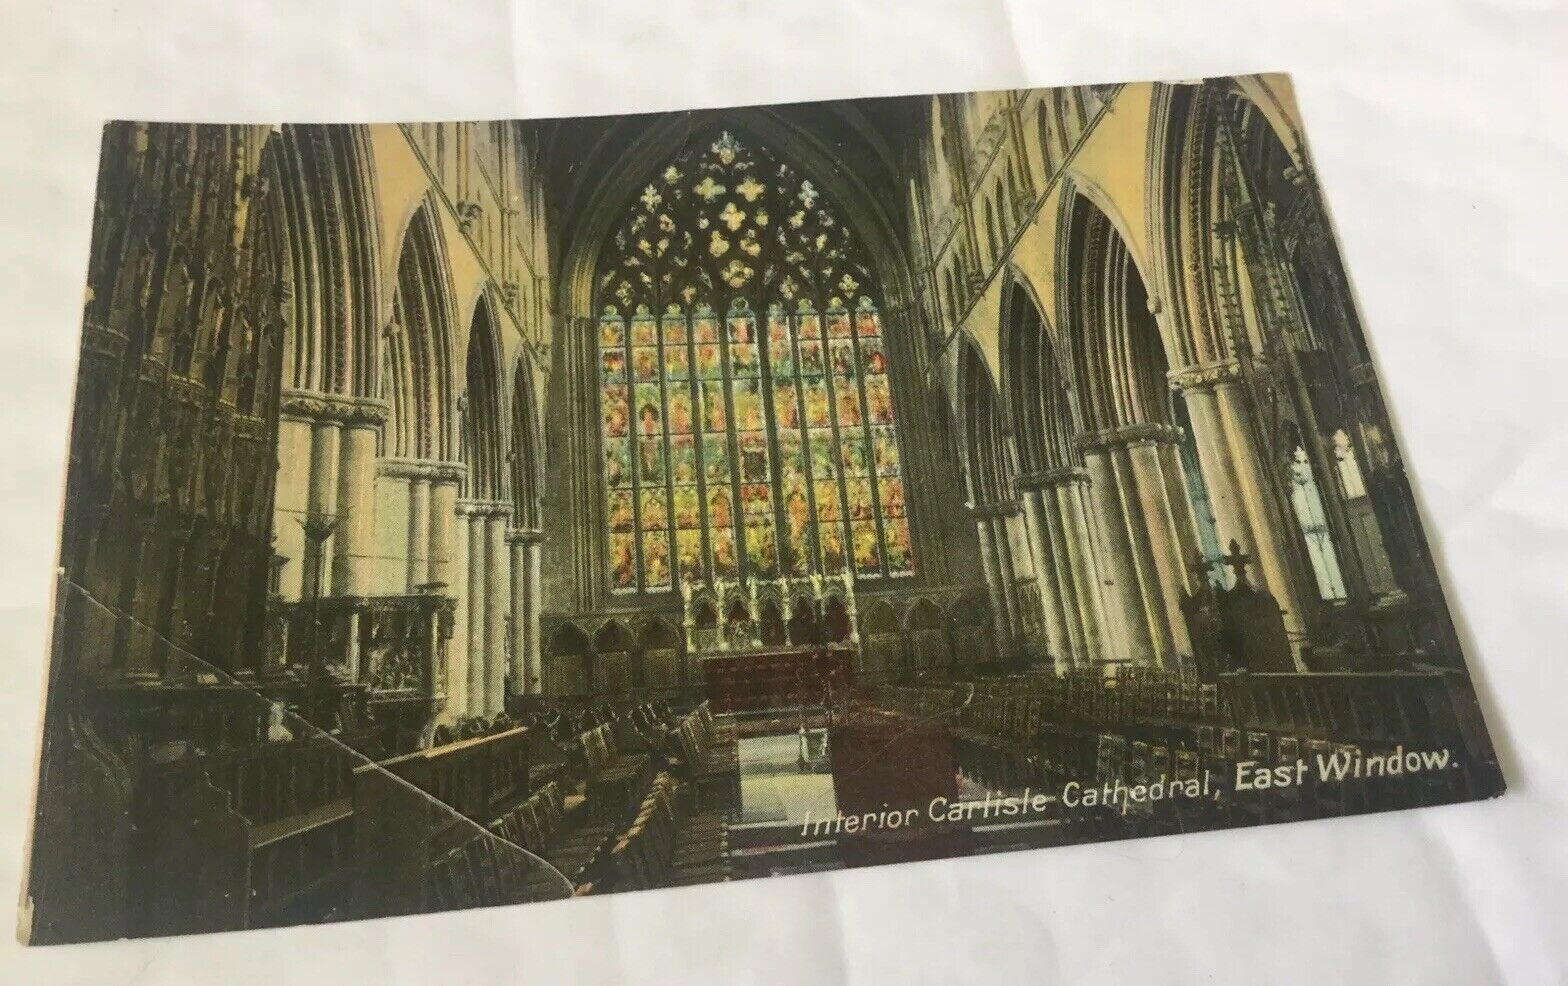 House Clearance - Interior Carlisle Cathedral